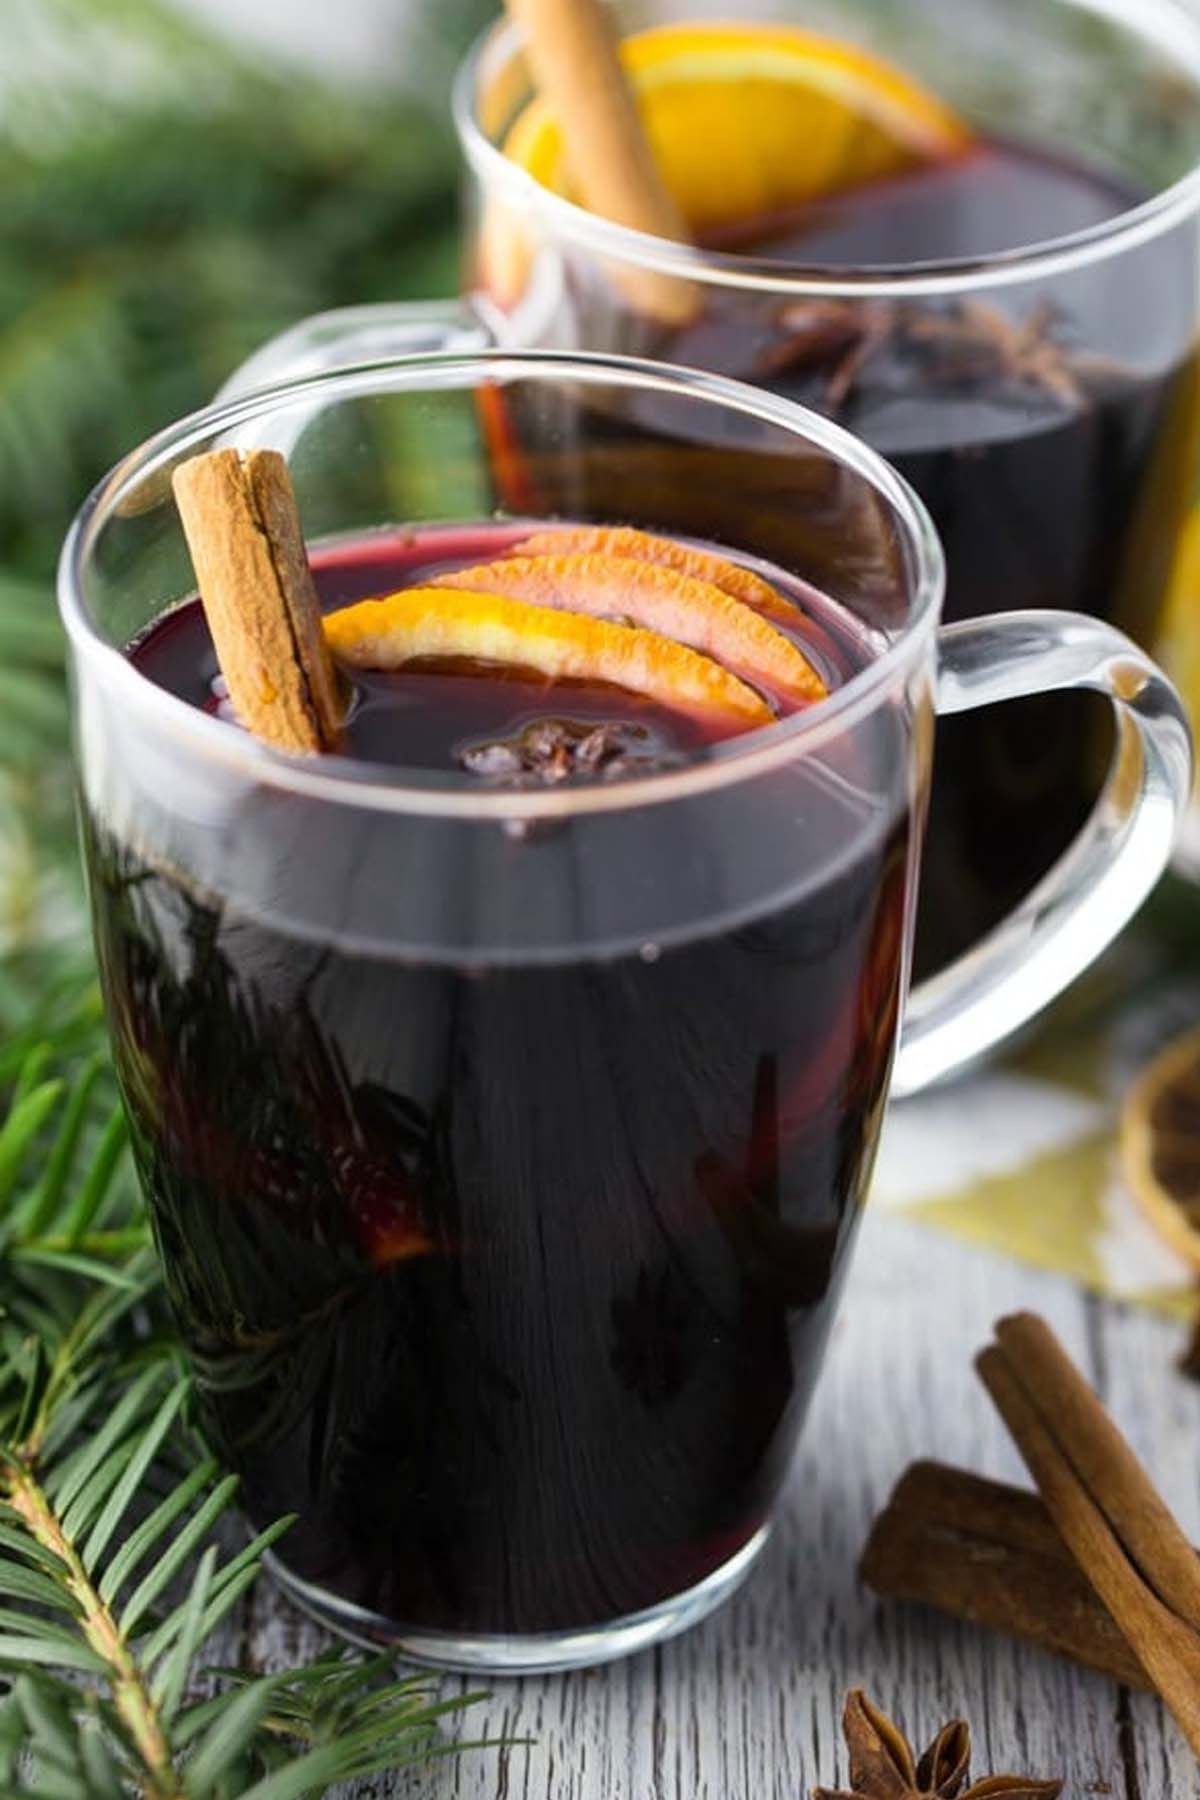 traditional german mulled wine recipe